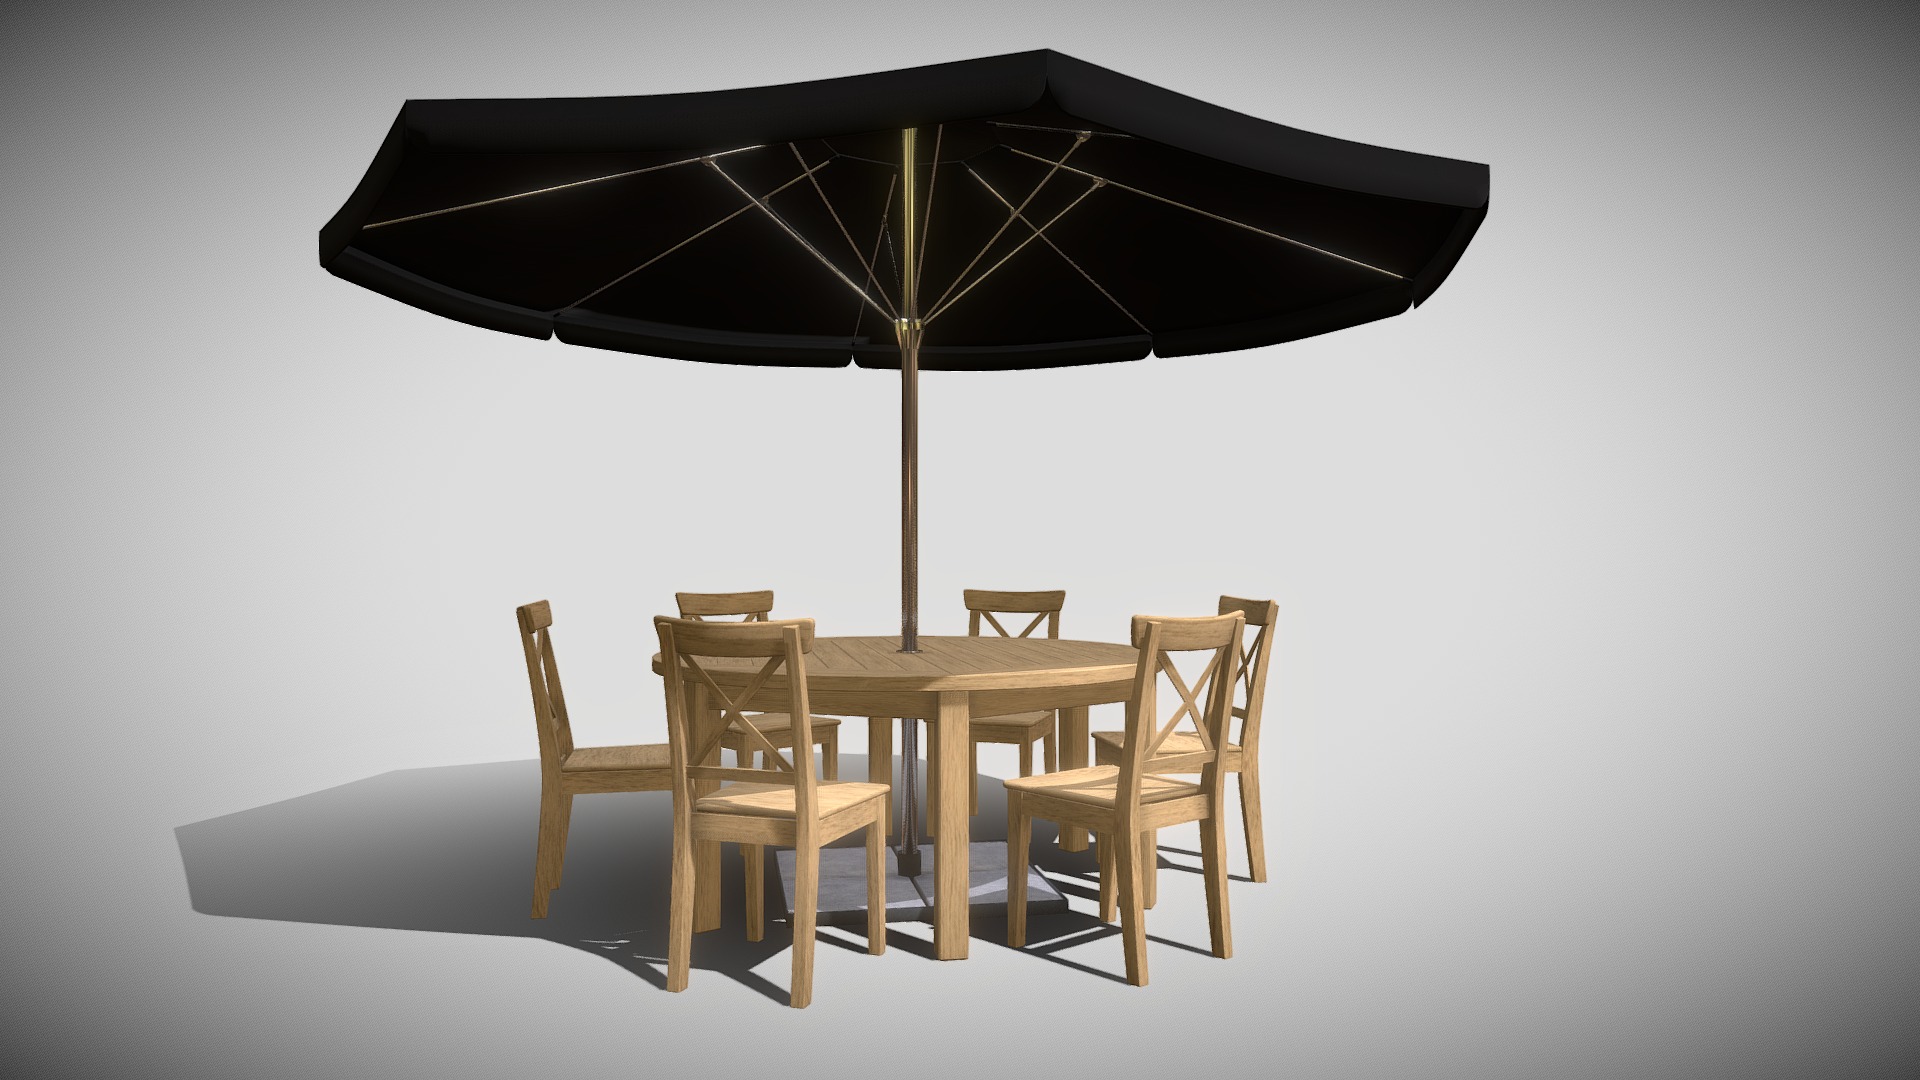 3D model Garden Furniture 6p 2 - This is a 3D model of the Garden Furniture 6p 2. The 3D model is about a table and chairs under an umbrella.